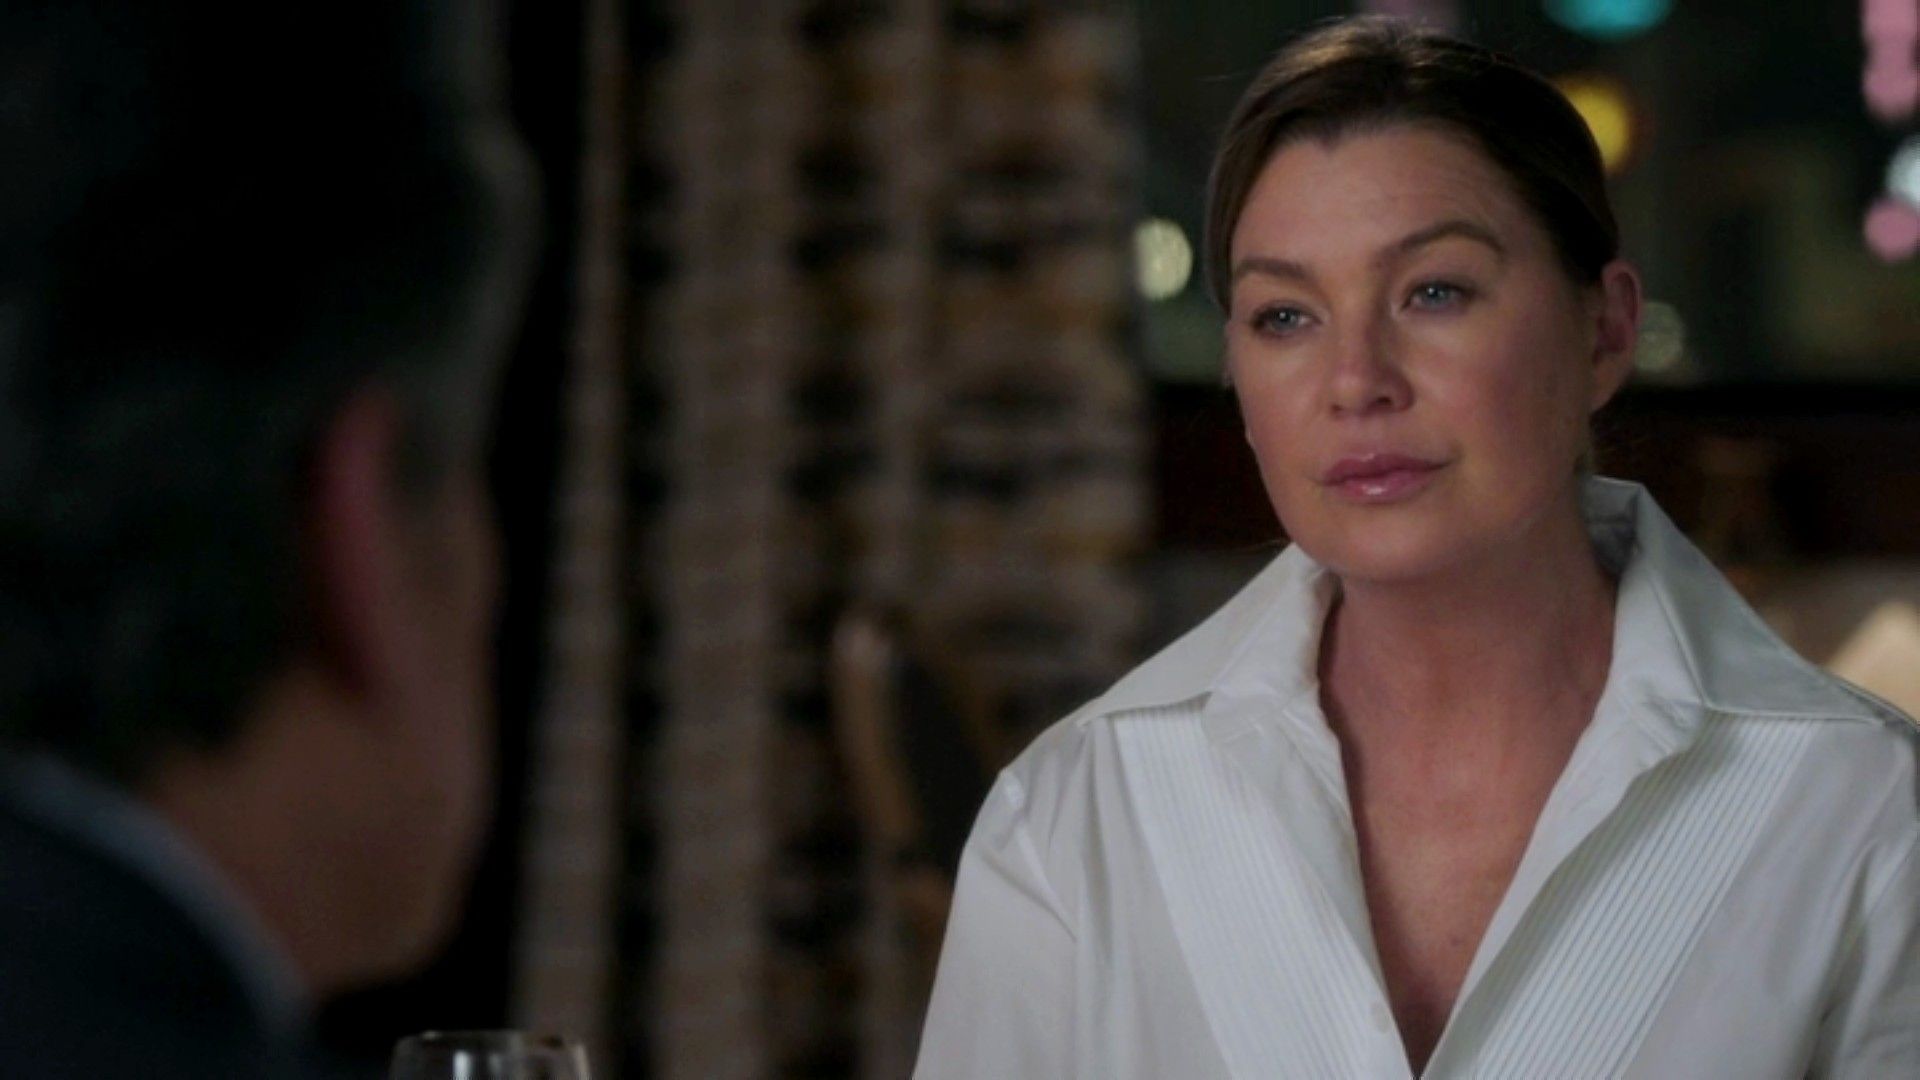 Meredith Grey focused on deciding whether to take the job in Minnesota